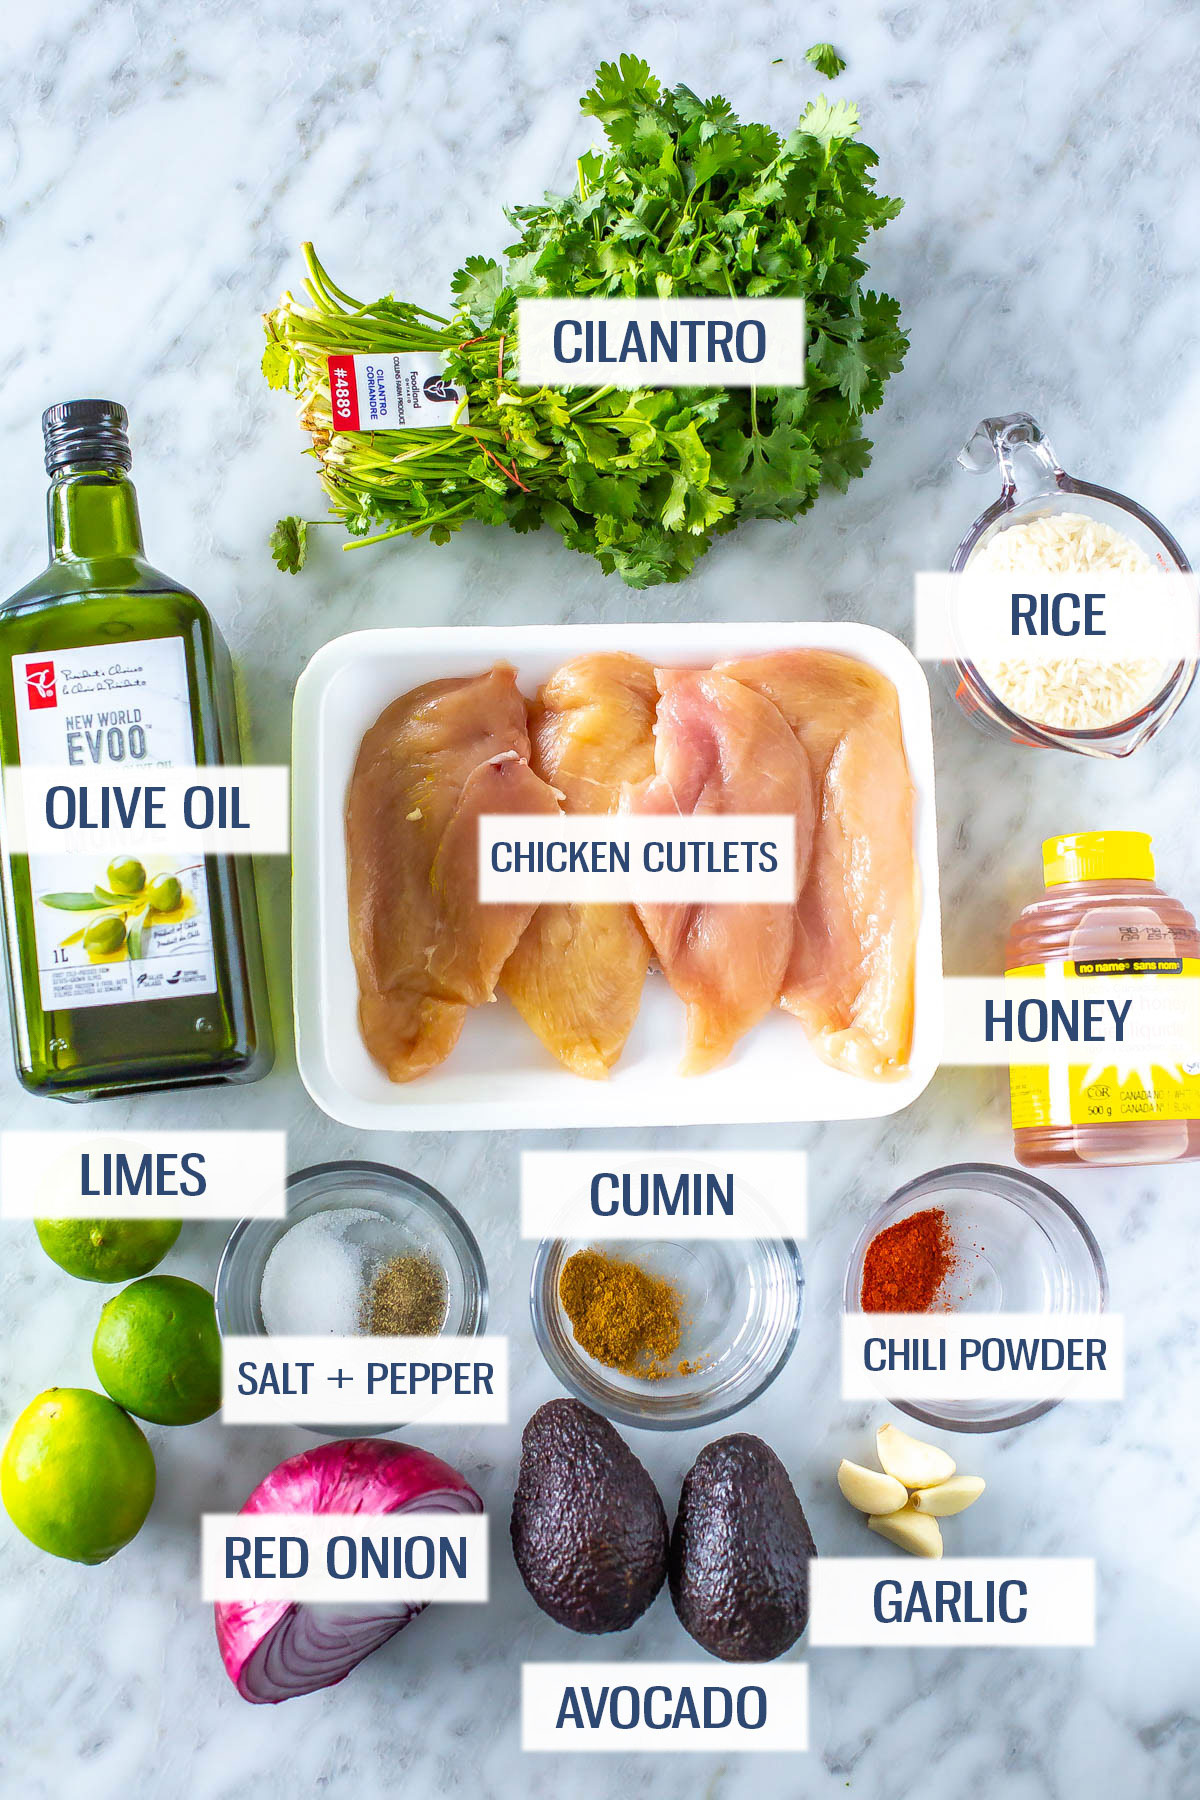 Ingredients for cilantro lime chicken and rice: cilantro, olive oil, chicken cutlets, rice, limes, cumin, chili powder, red onion, avocado, garlic, salt and pepper.